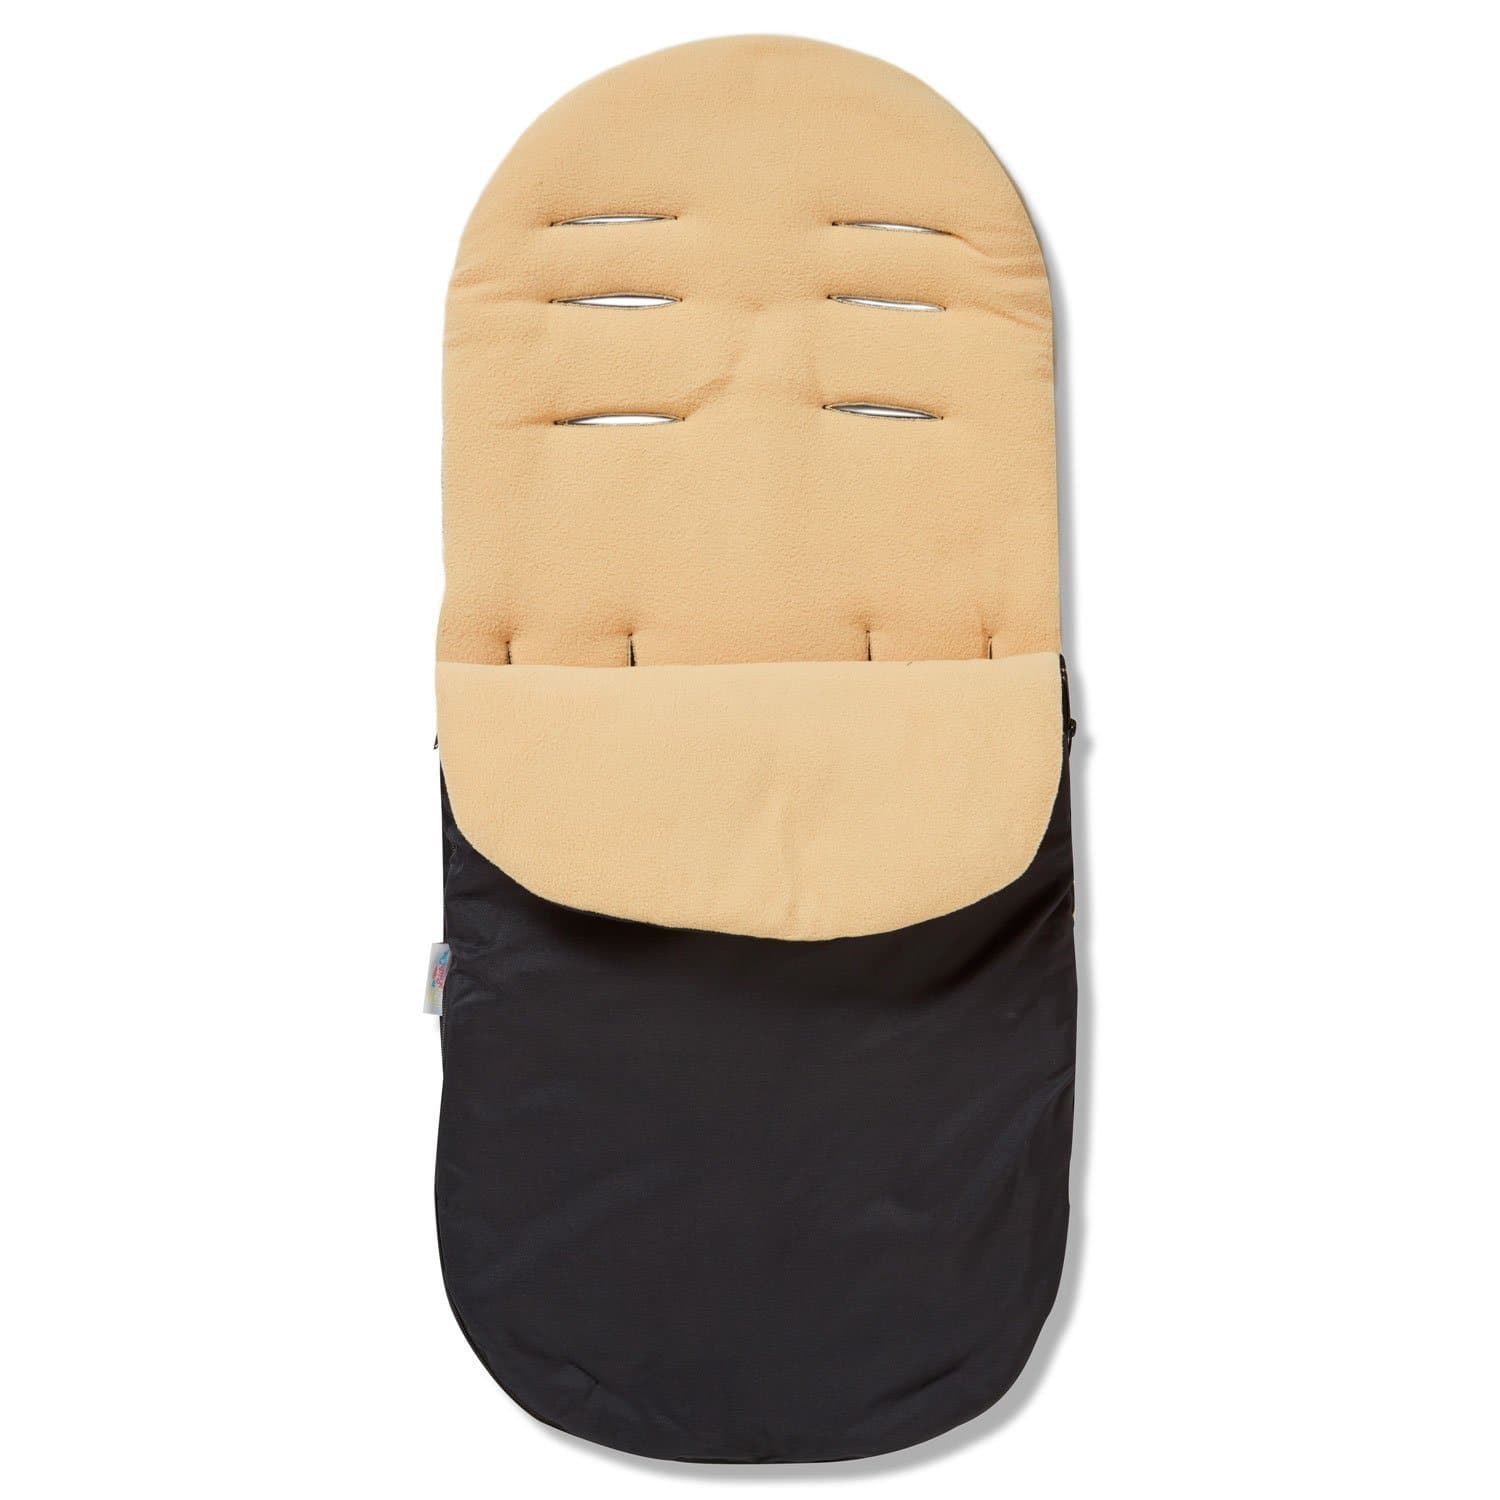 Footmuff / Cosy Toes Compatible with Koelstra - For Your Little One